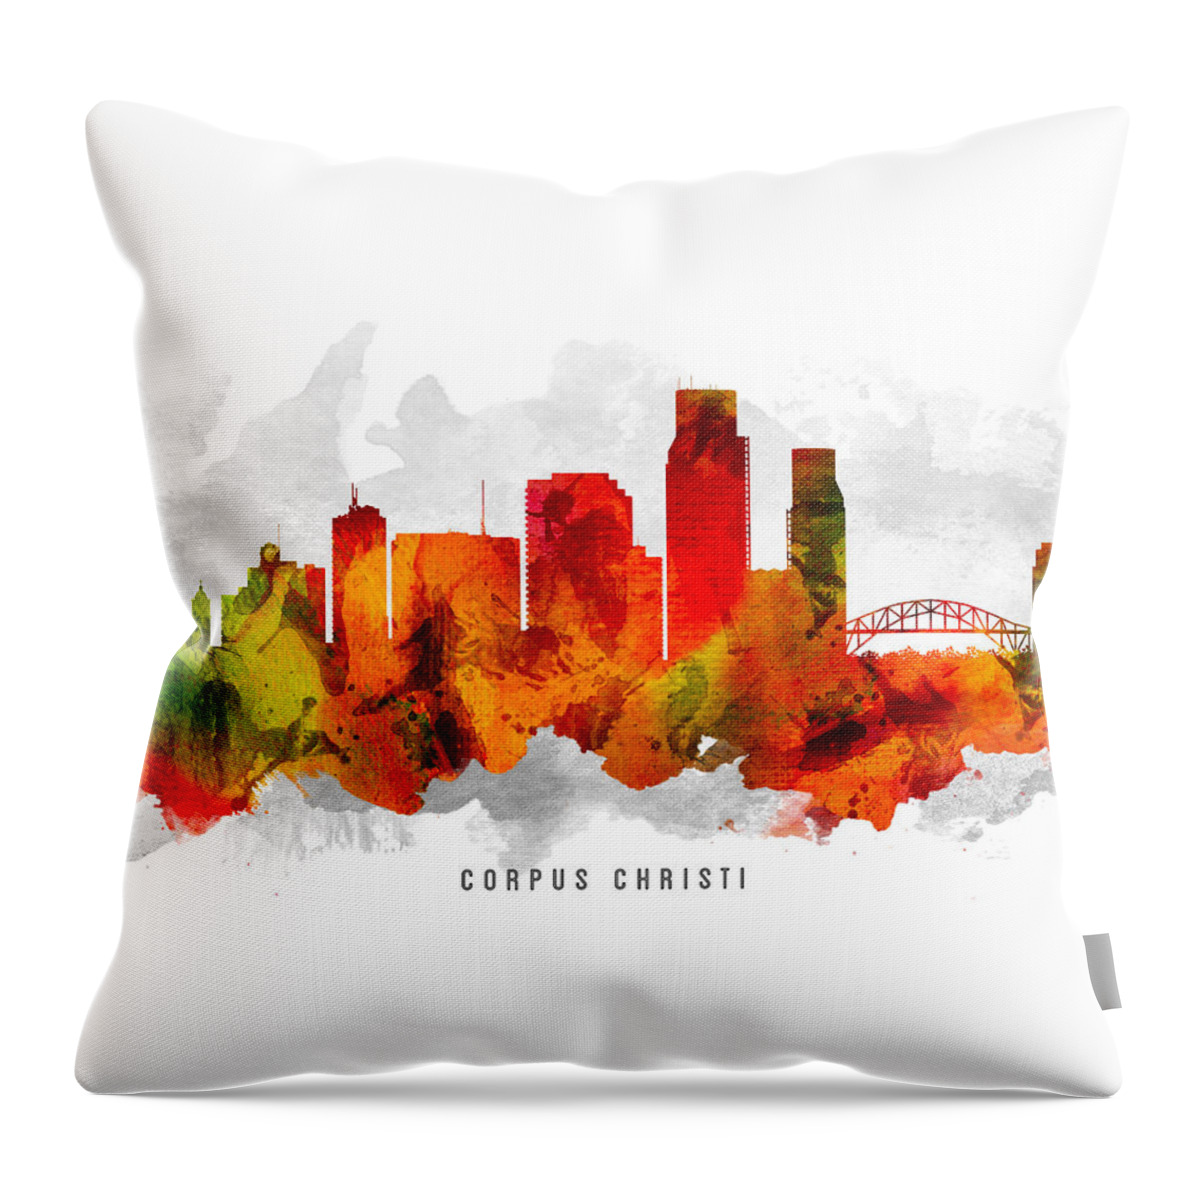 Corpus Christi Throw Pillow featuring the painting Corpus Christi Texas Cityscape 15 by Aged Pixel